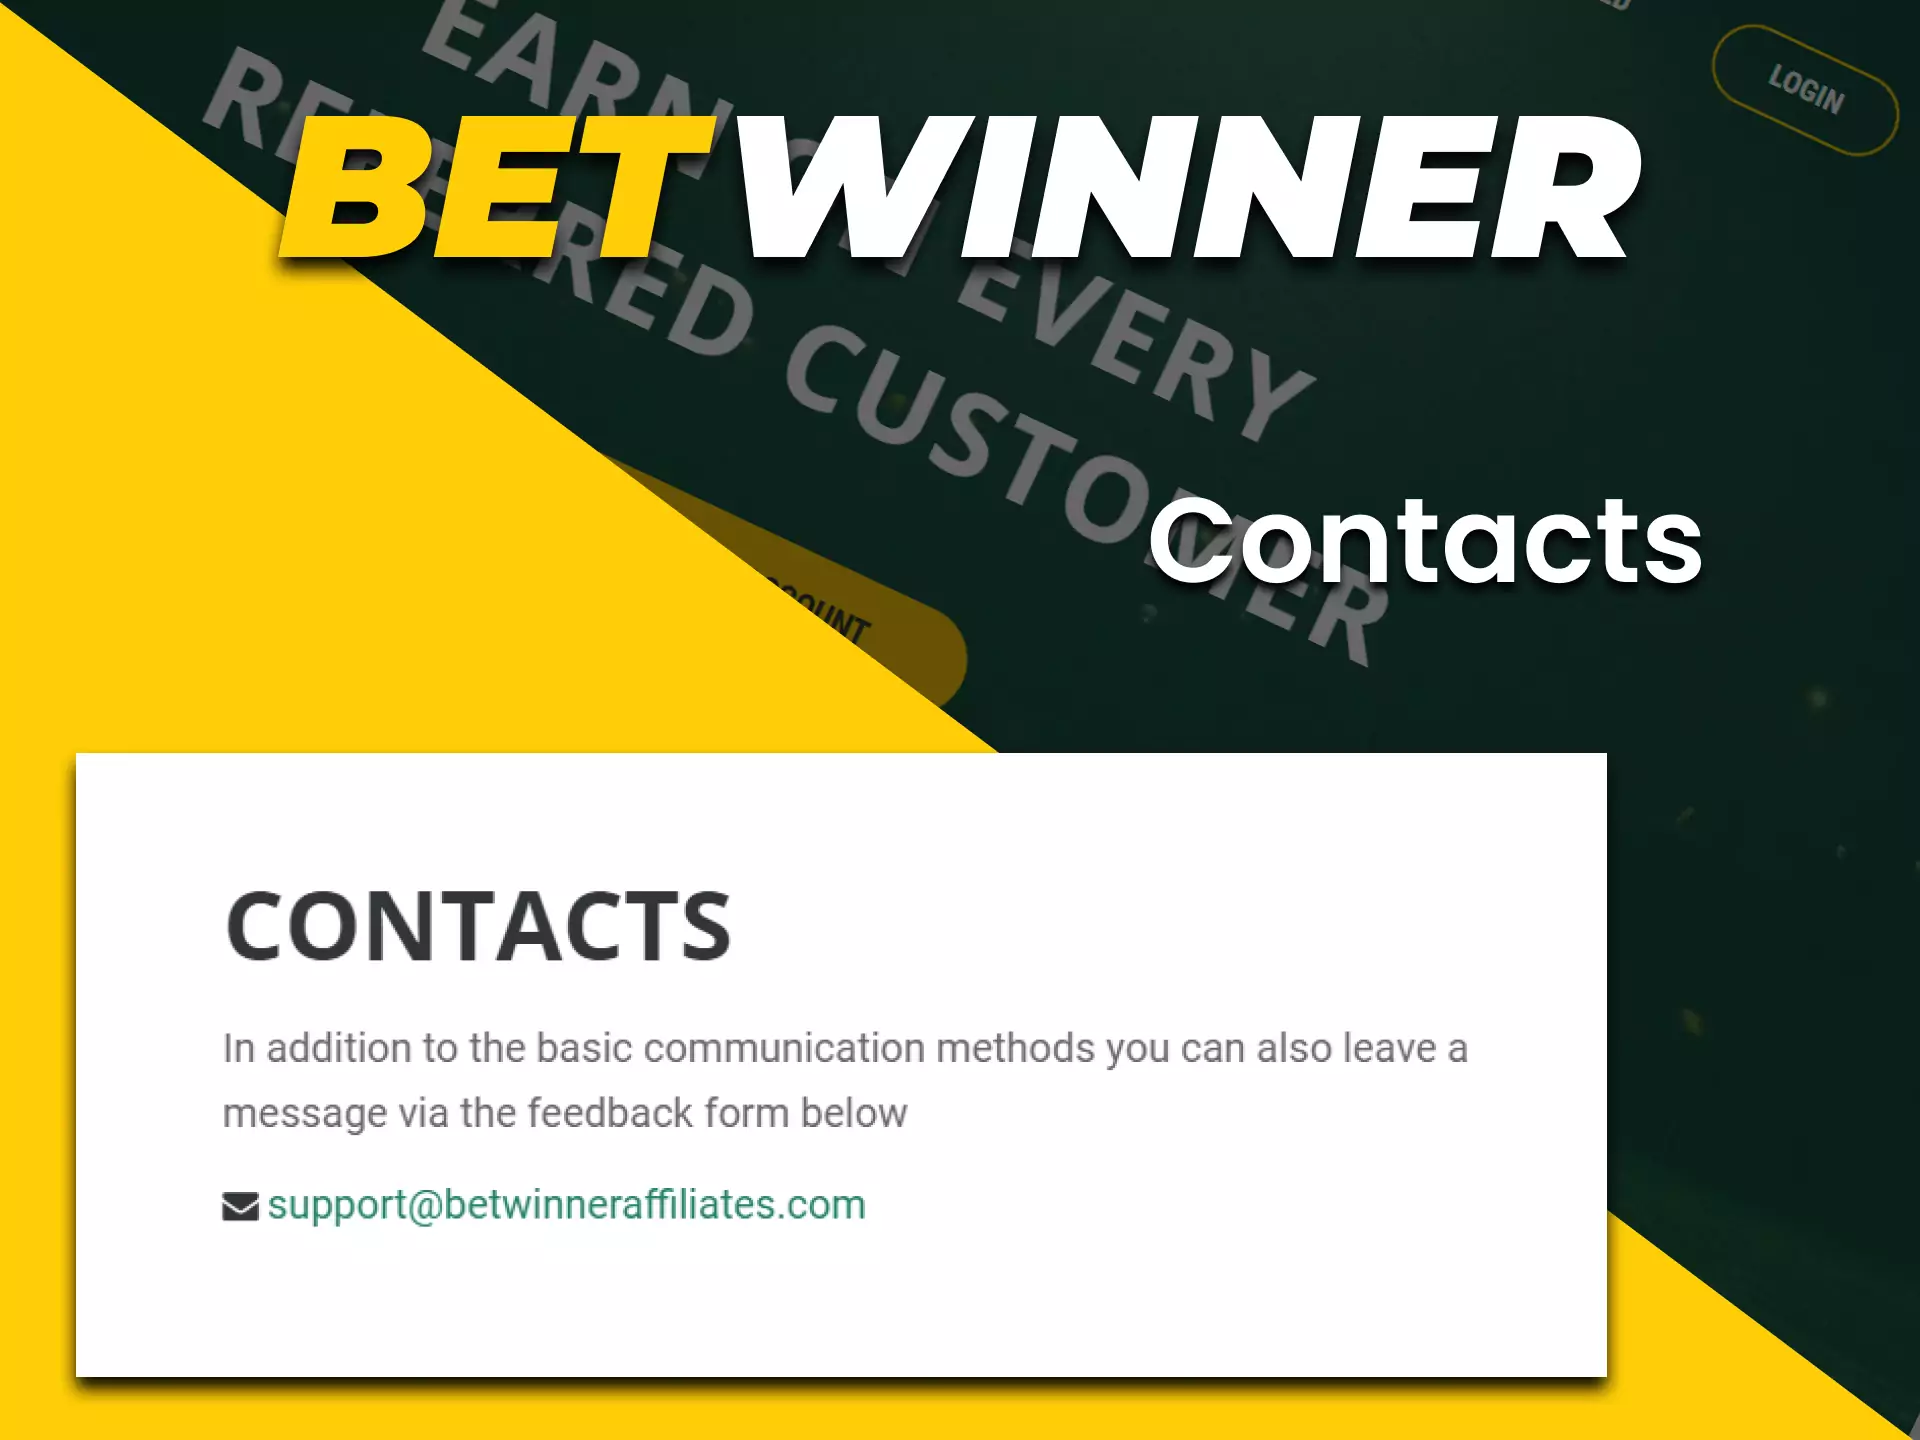 Use email to contact the Betwinner support team.